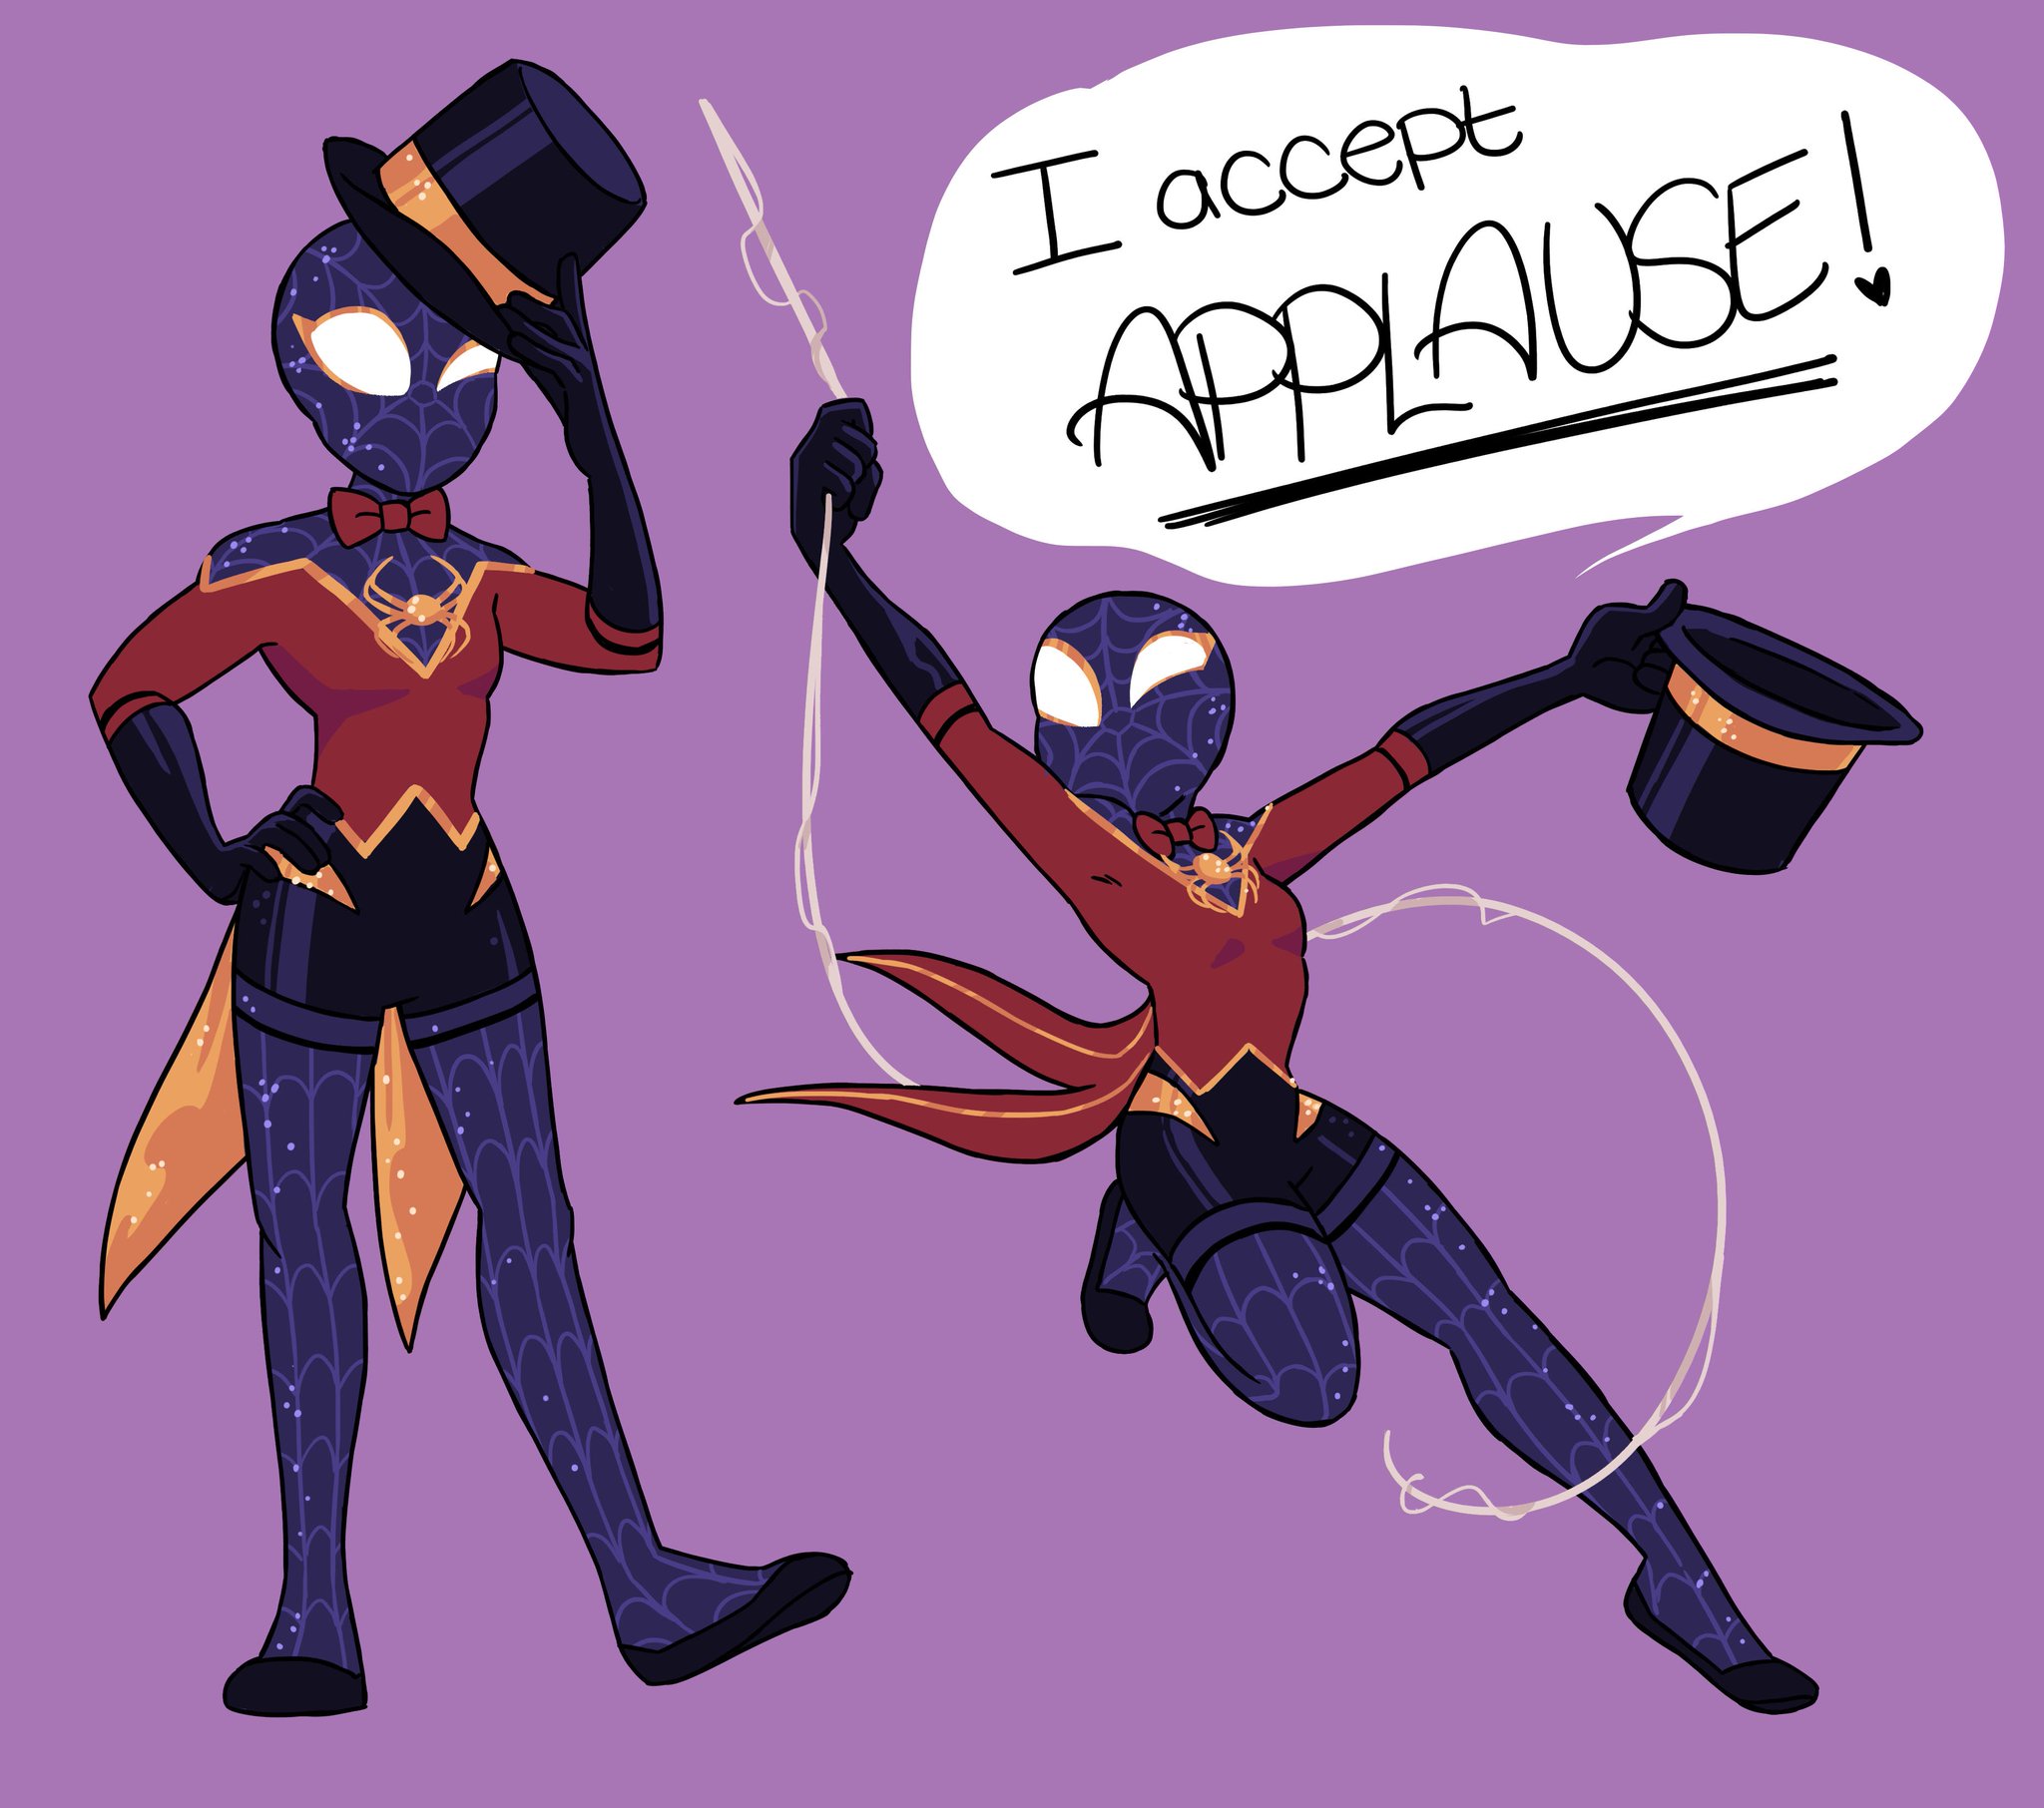 Spider-Woman [ SPIDERSONA ] by holybodega on Newgrounds